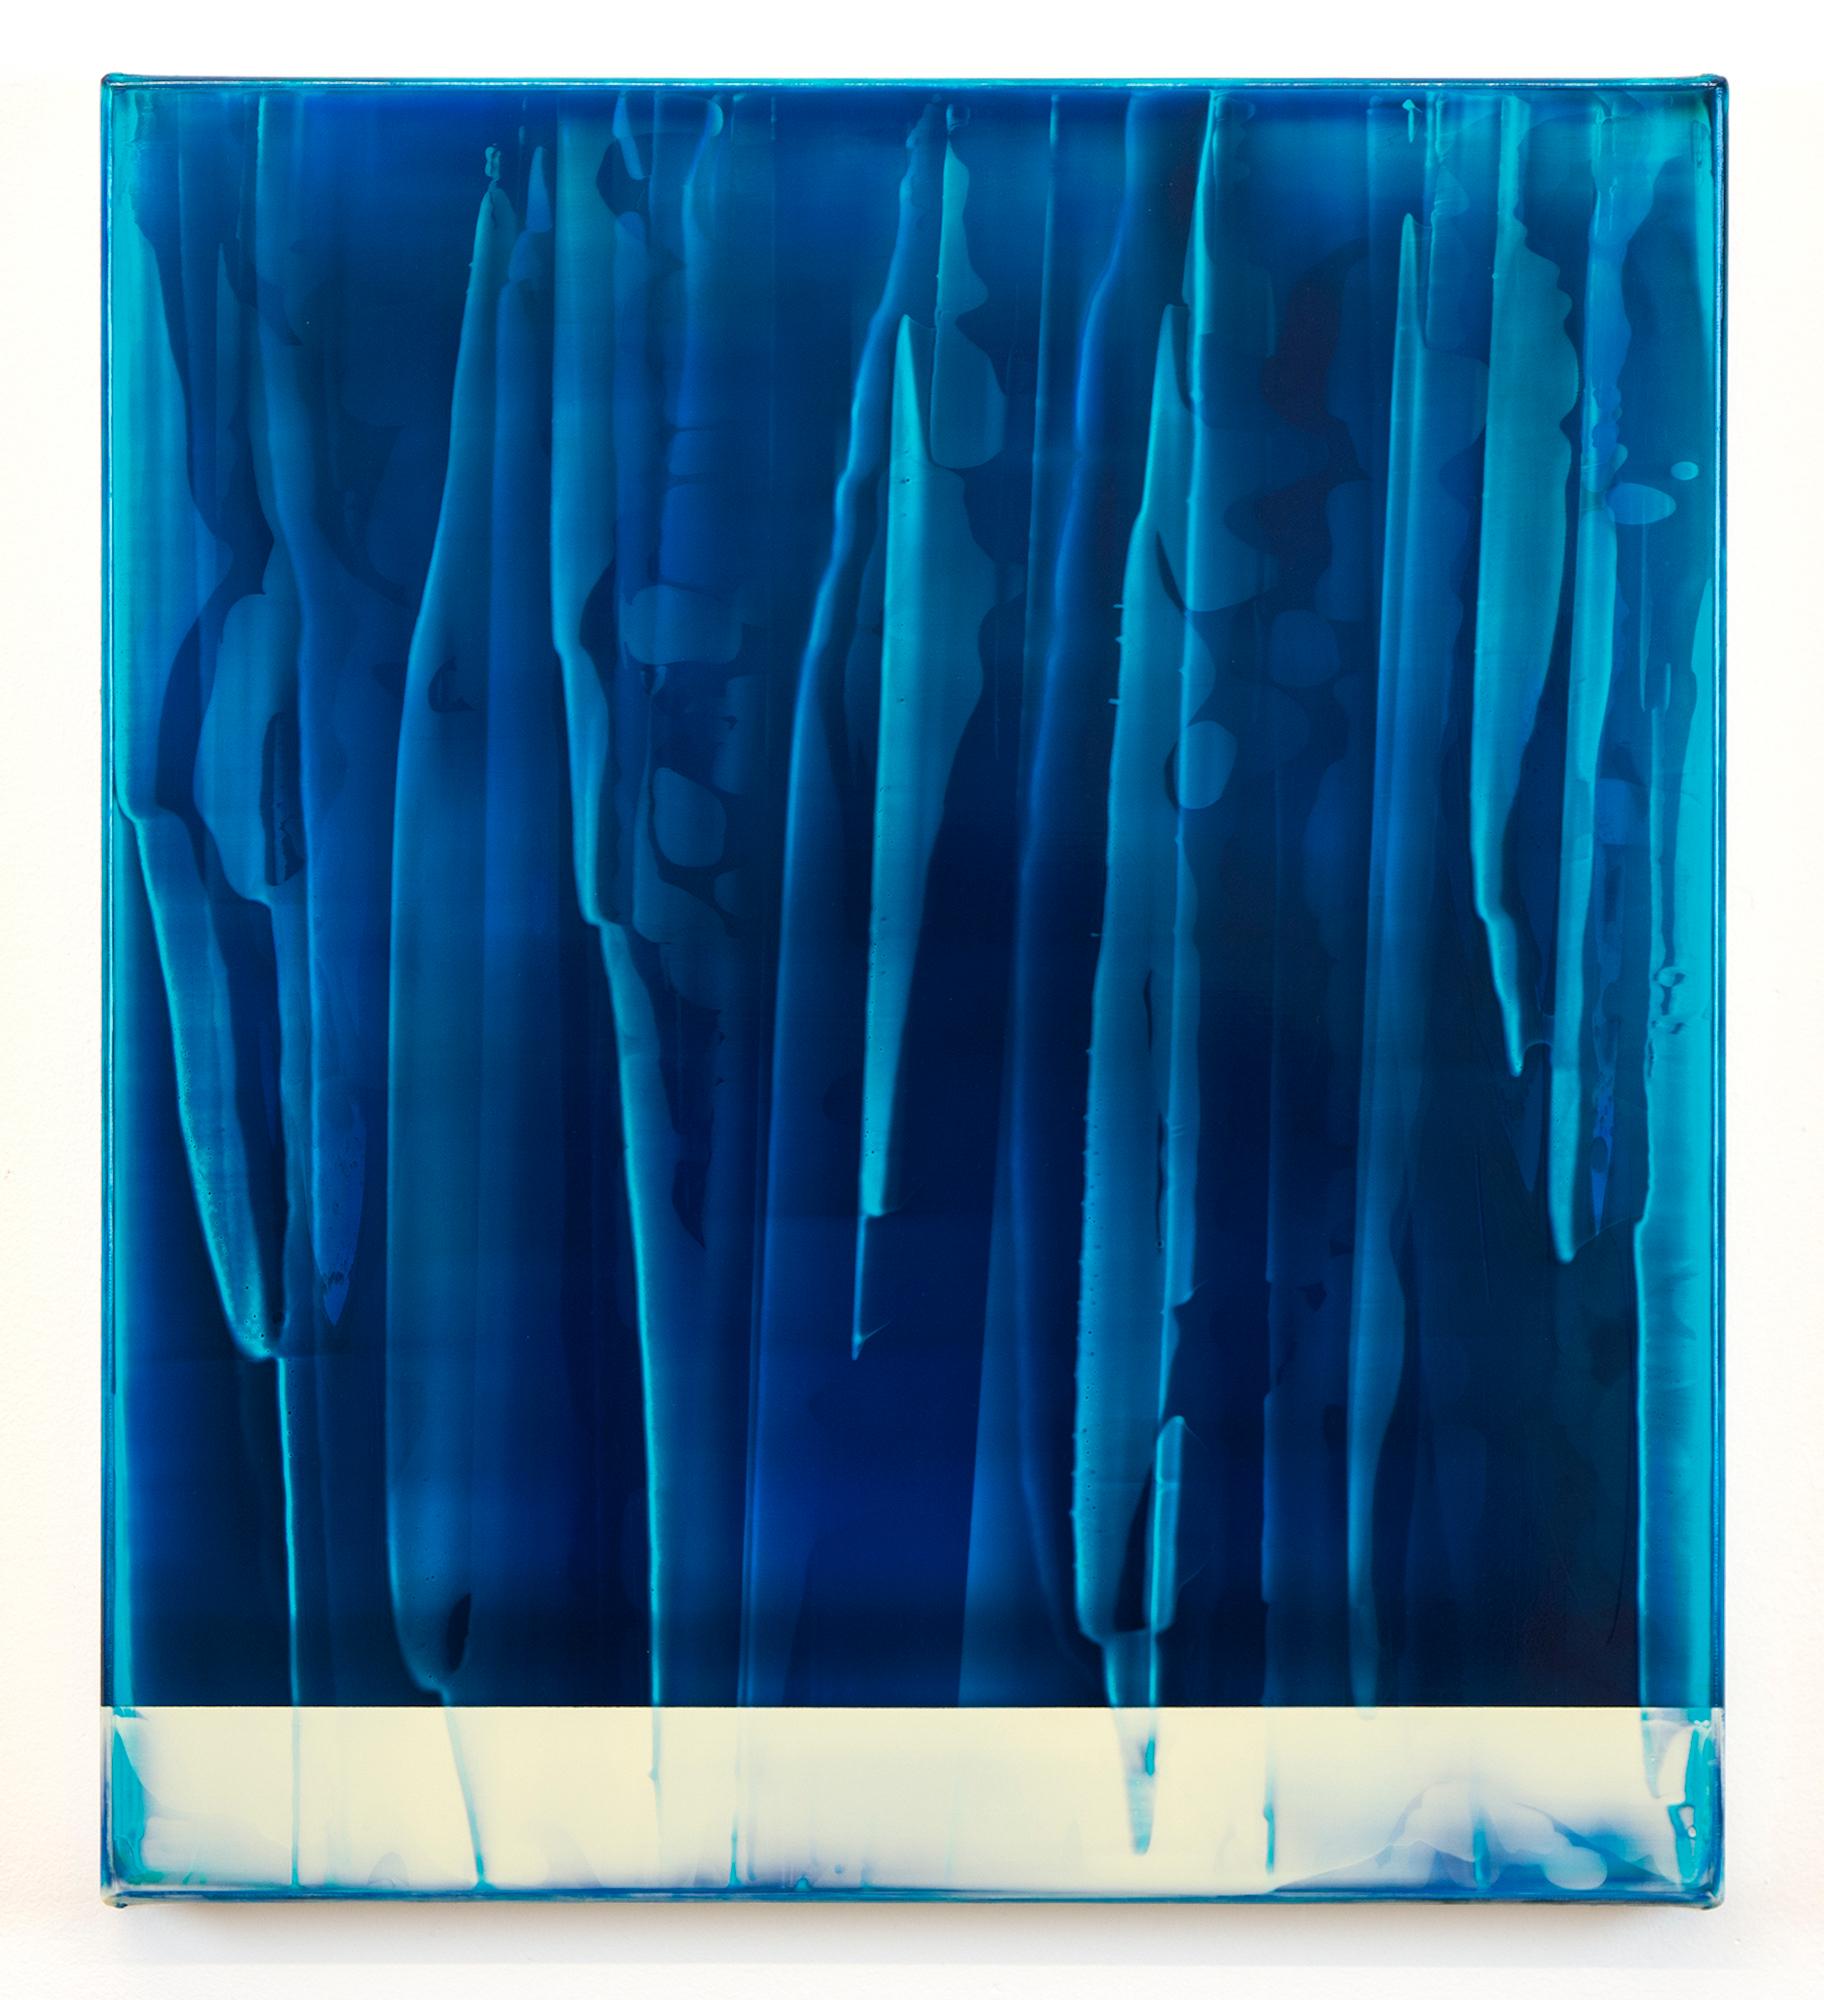 Echoes (1/19) by James Lumsden - Abstract colour painting, blue tones, gloss For Sale 1